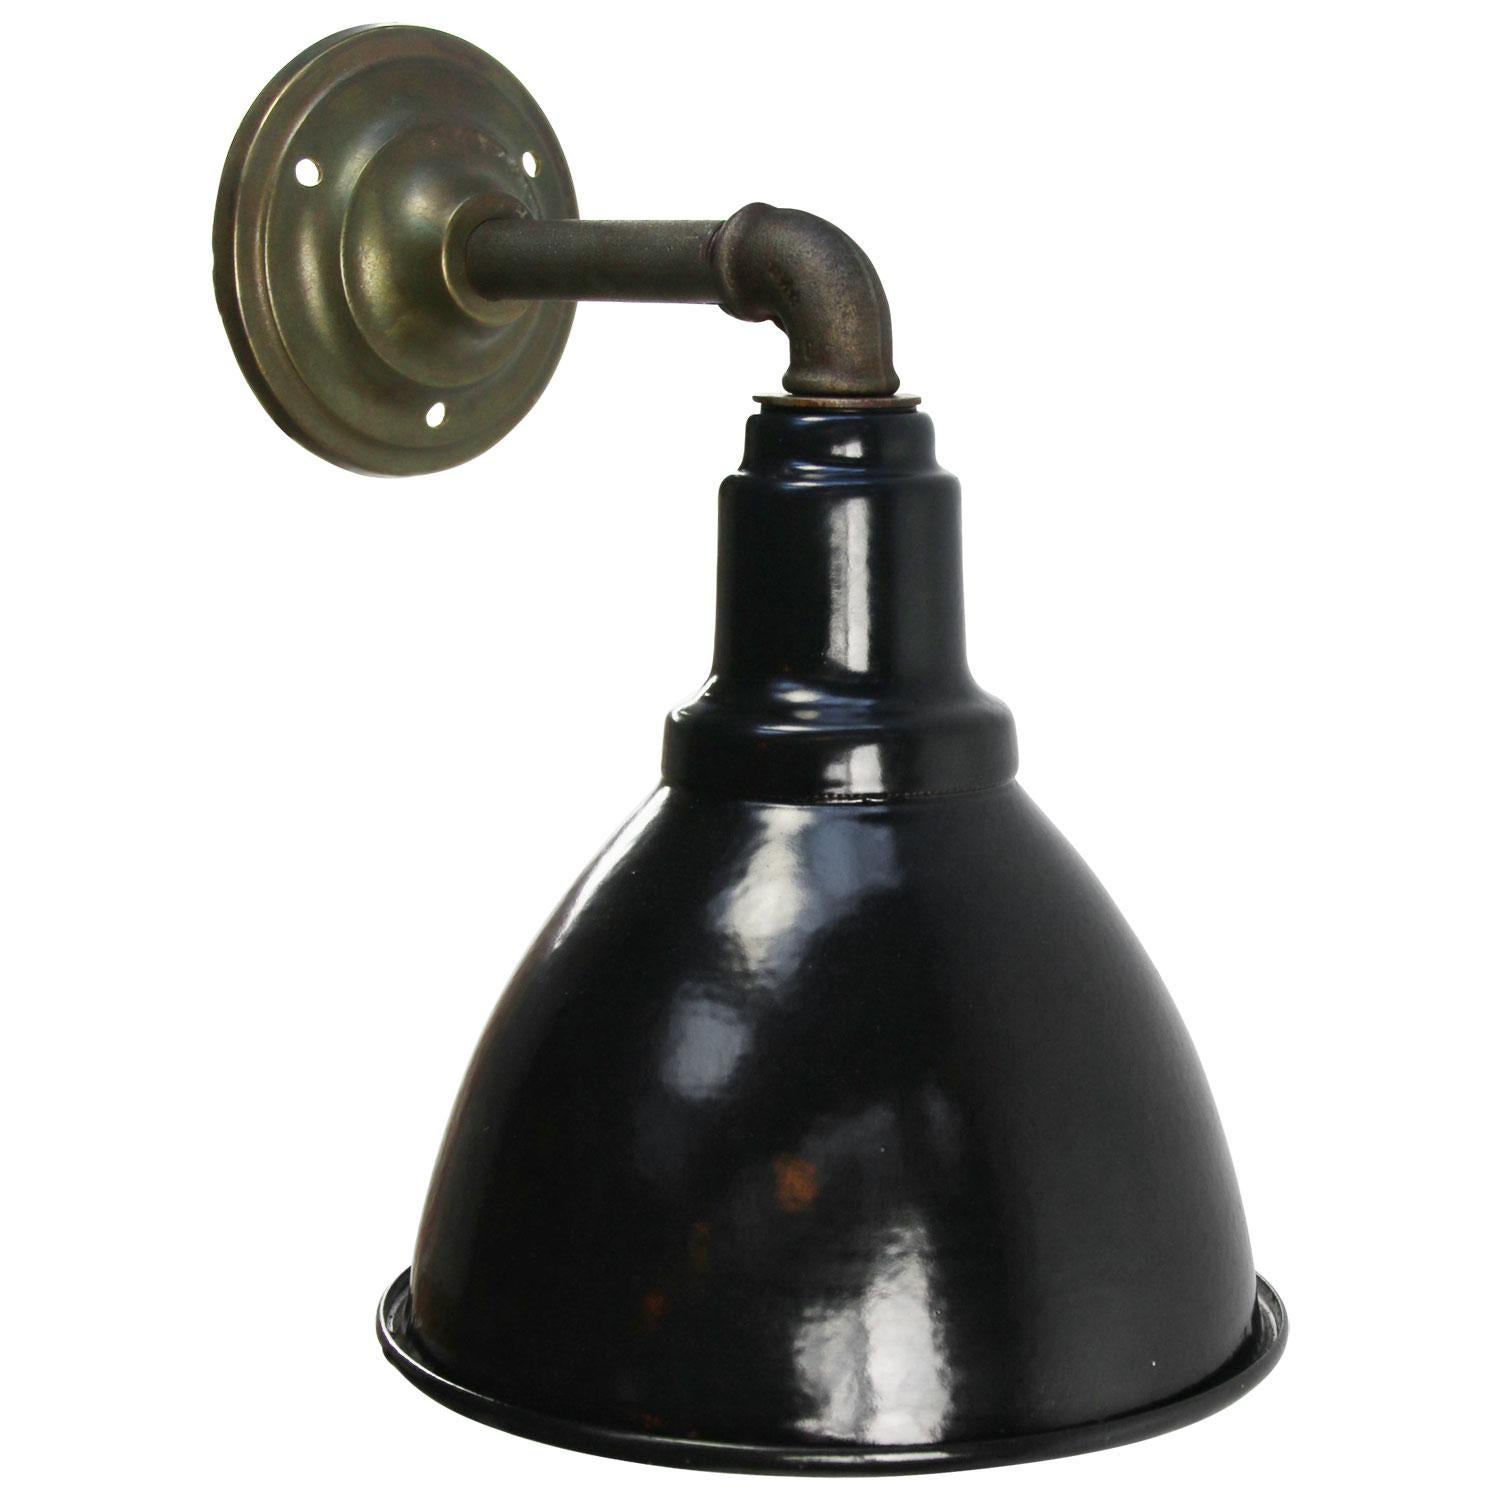 Industrial wall light
Black enamel shade, cast iron arm and brass wall plate

diameter cast iron wall piece: 10 cm, 2 holes to secure

Weight: 1.80 kg / 4 lb

Priced per individual item. All lamps have been made suitable by international